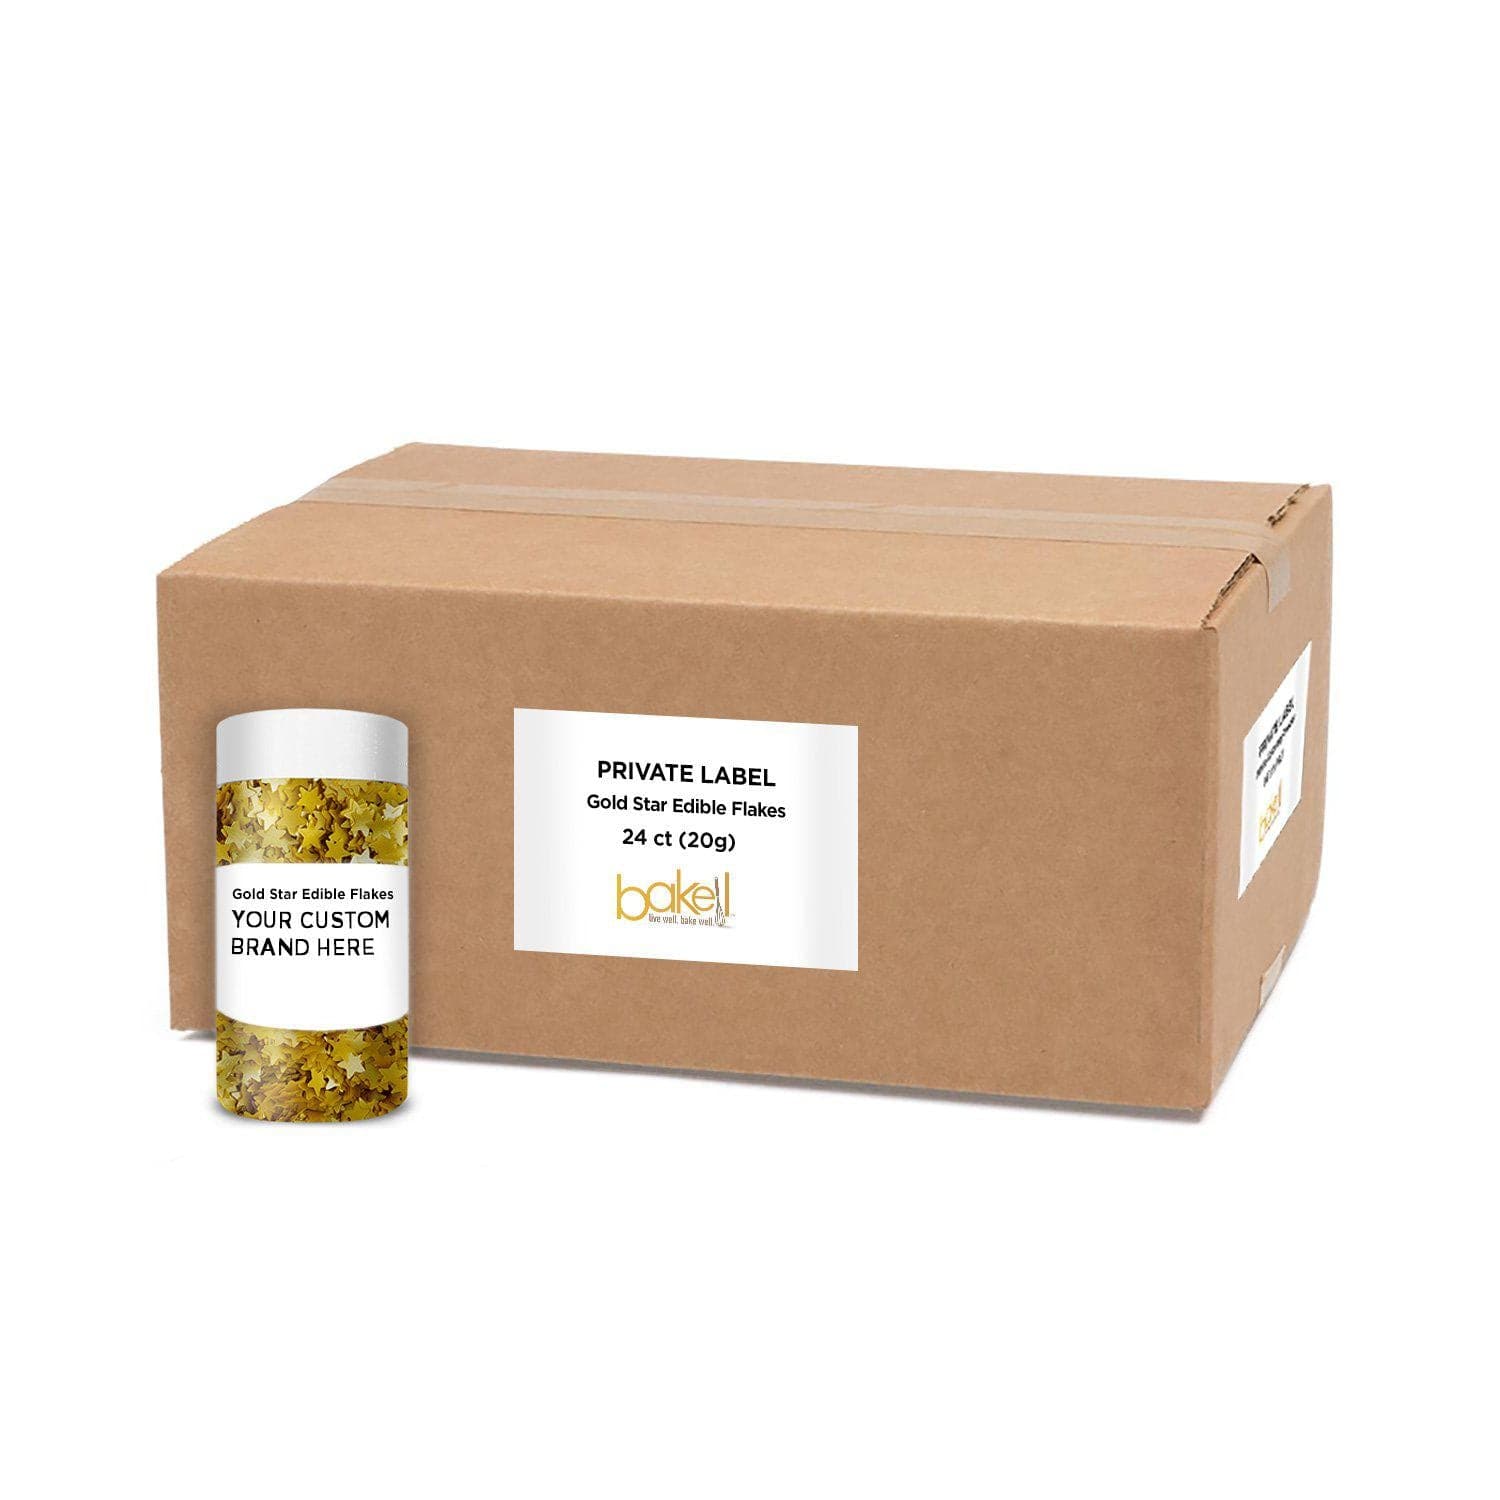 Private Label Gold Star Shaped Flakes | Bakell